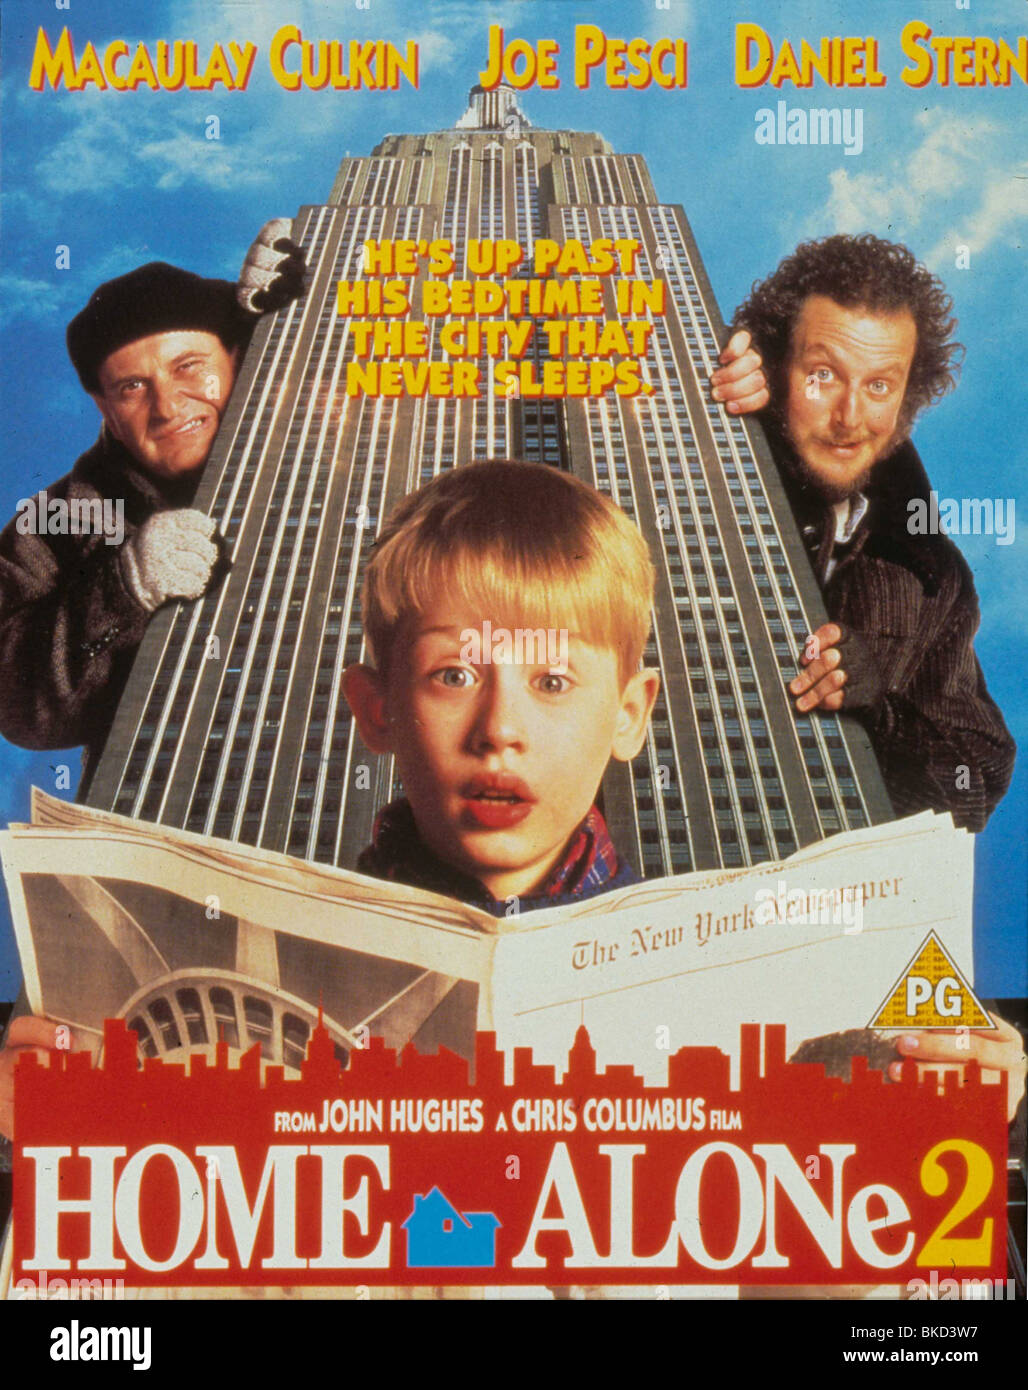 home-alone-2-lost-in-new-york-1992-poster-hm2-064-BKD3W7.jpg